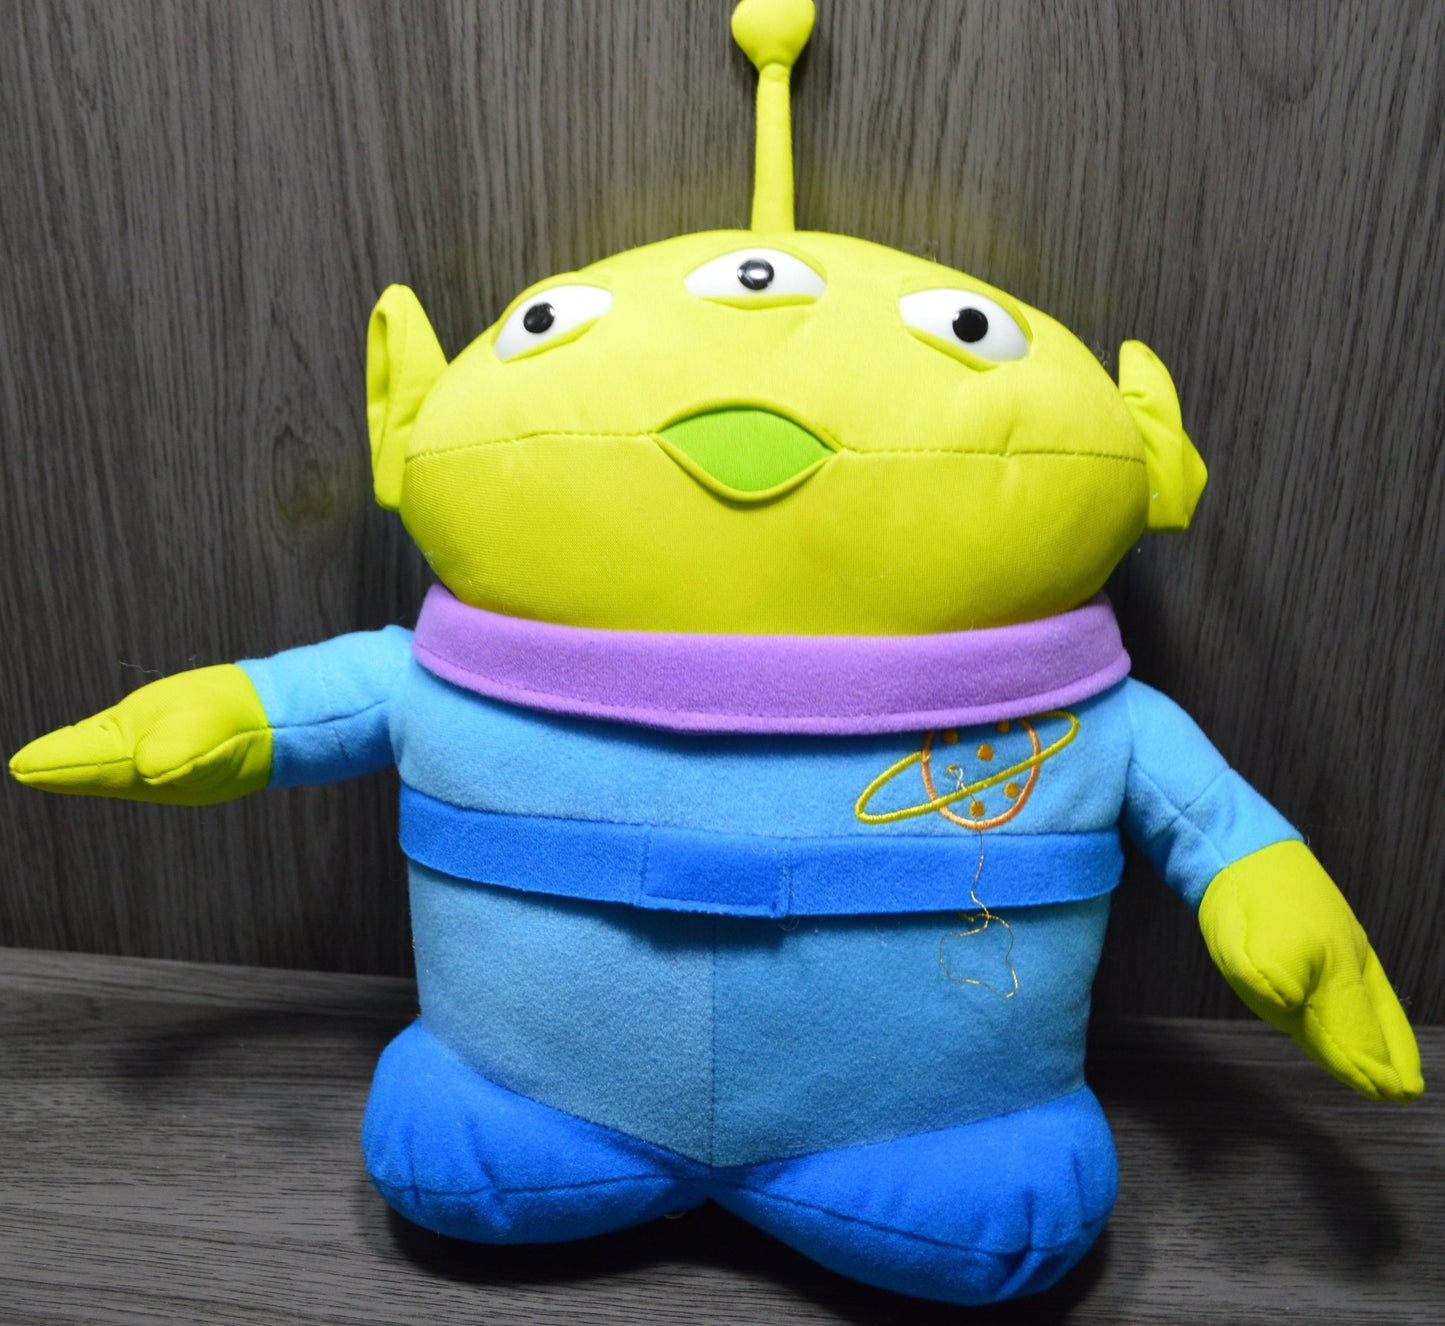 SOFT TOY DISNEY PIXAR TOY STORY ALIEN(PREVIOUSLY OWNED)GOOD CONDITION - TMD167207